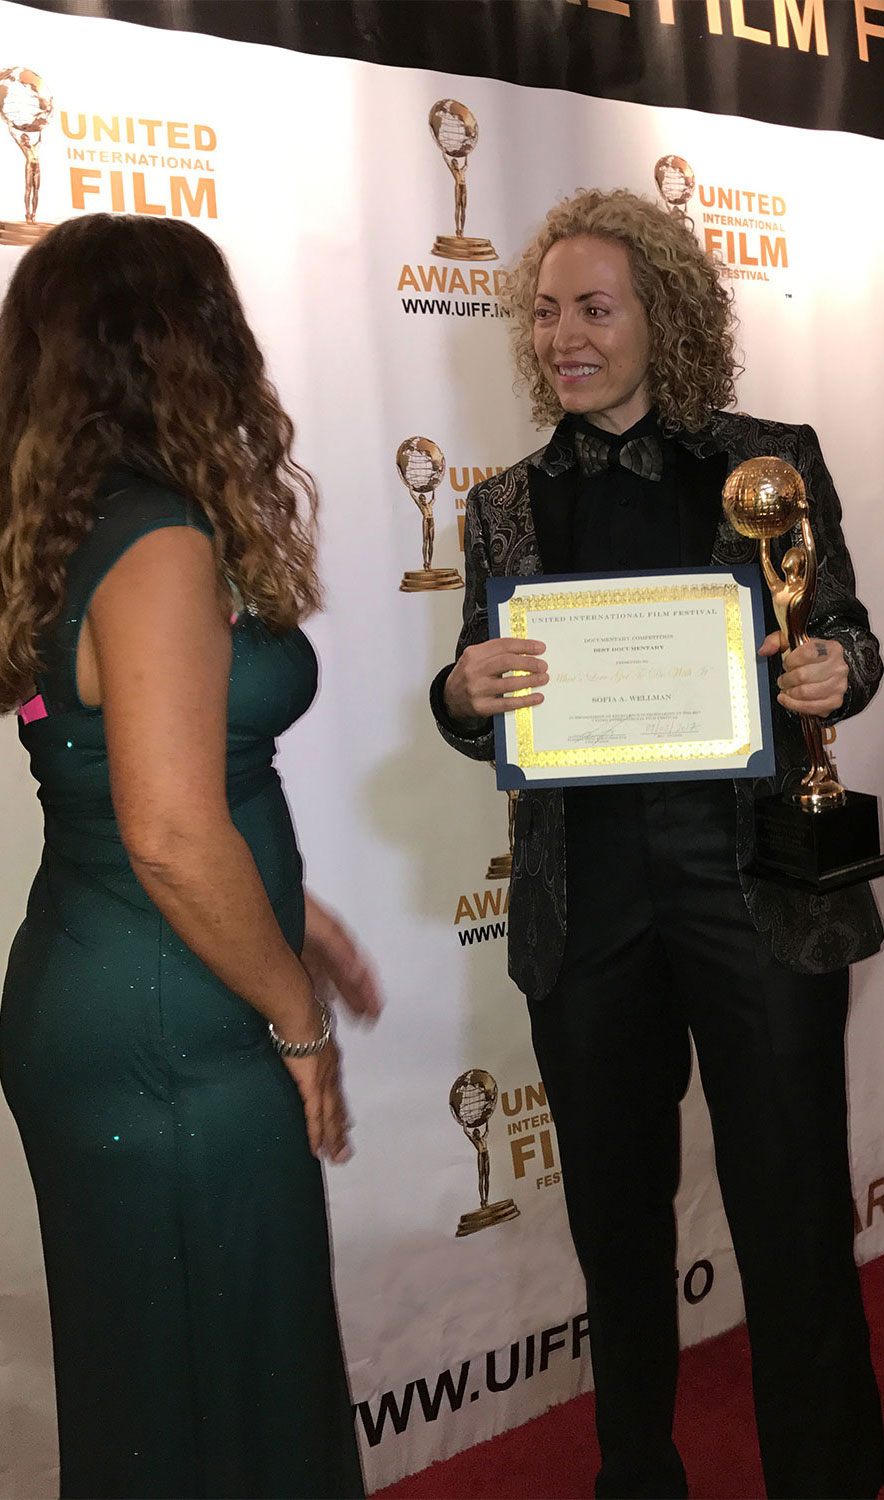 Sofia Wellman - Red Carpet Interview - United International Film Awards - 2017 - Whats Love Got To Do With It - Film by Sofia Wellman